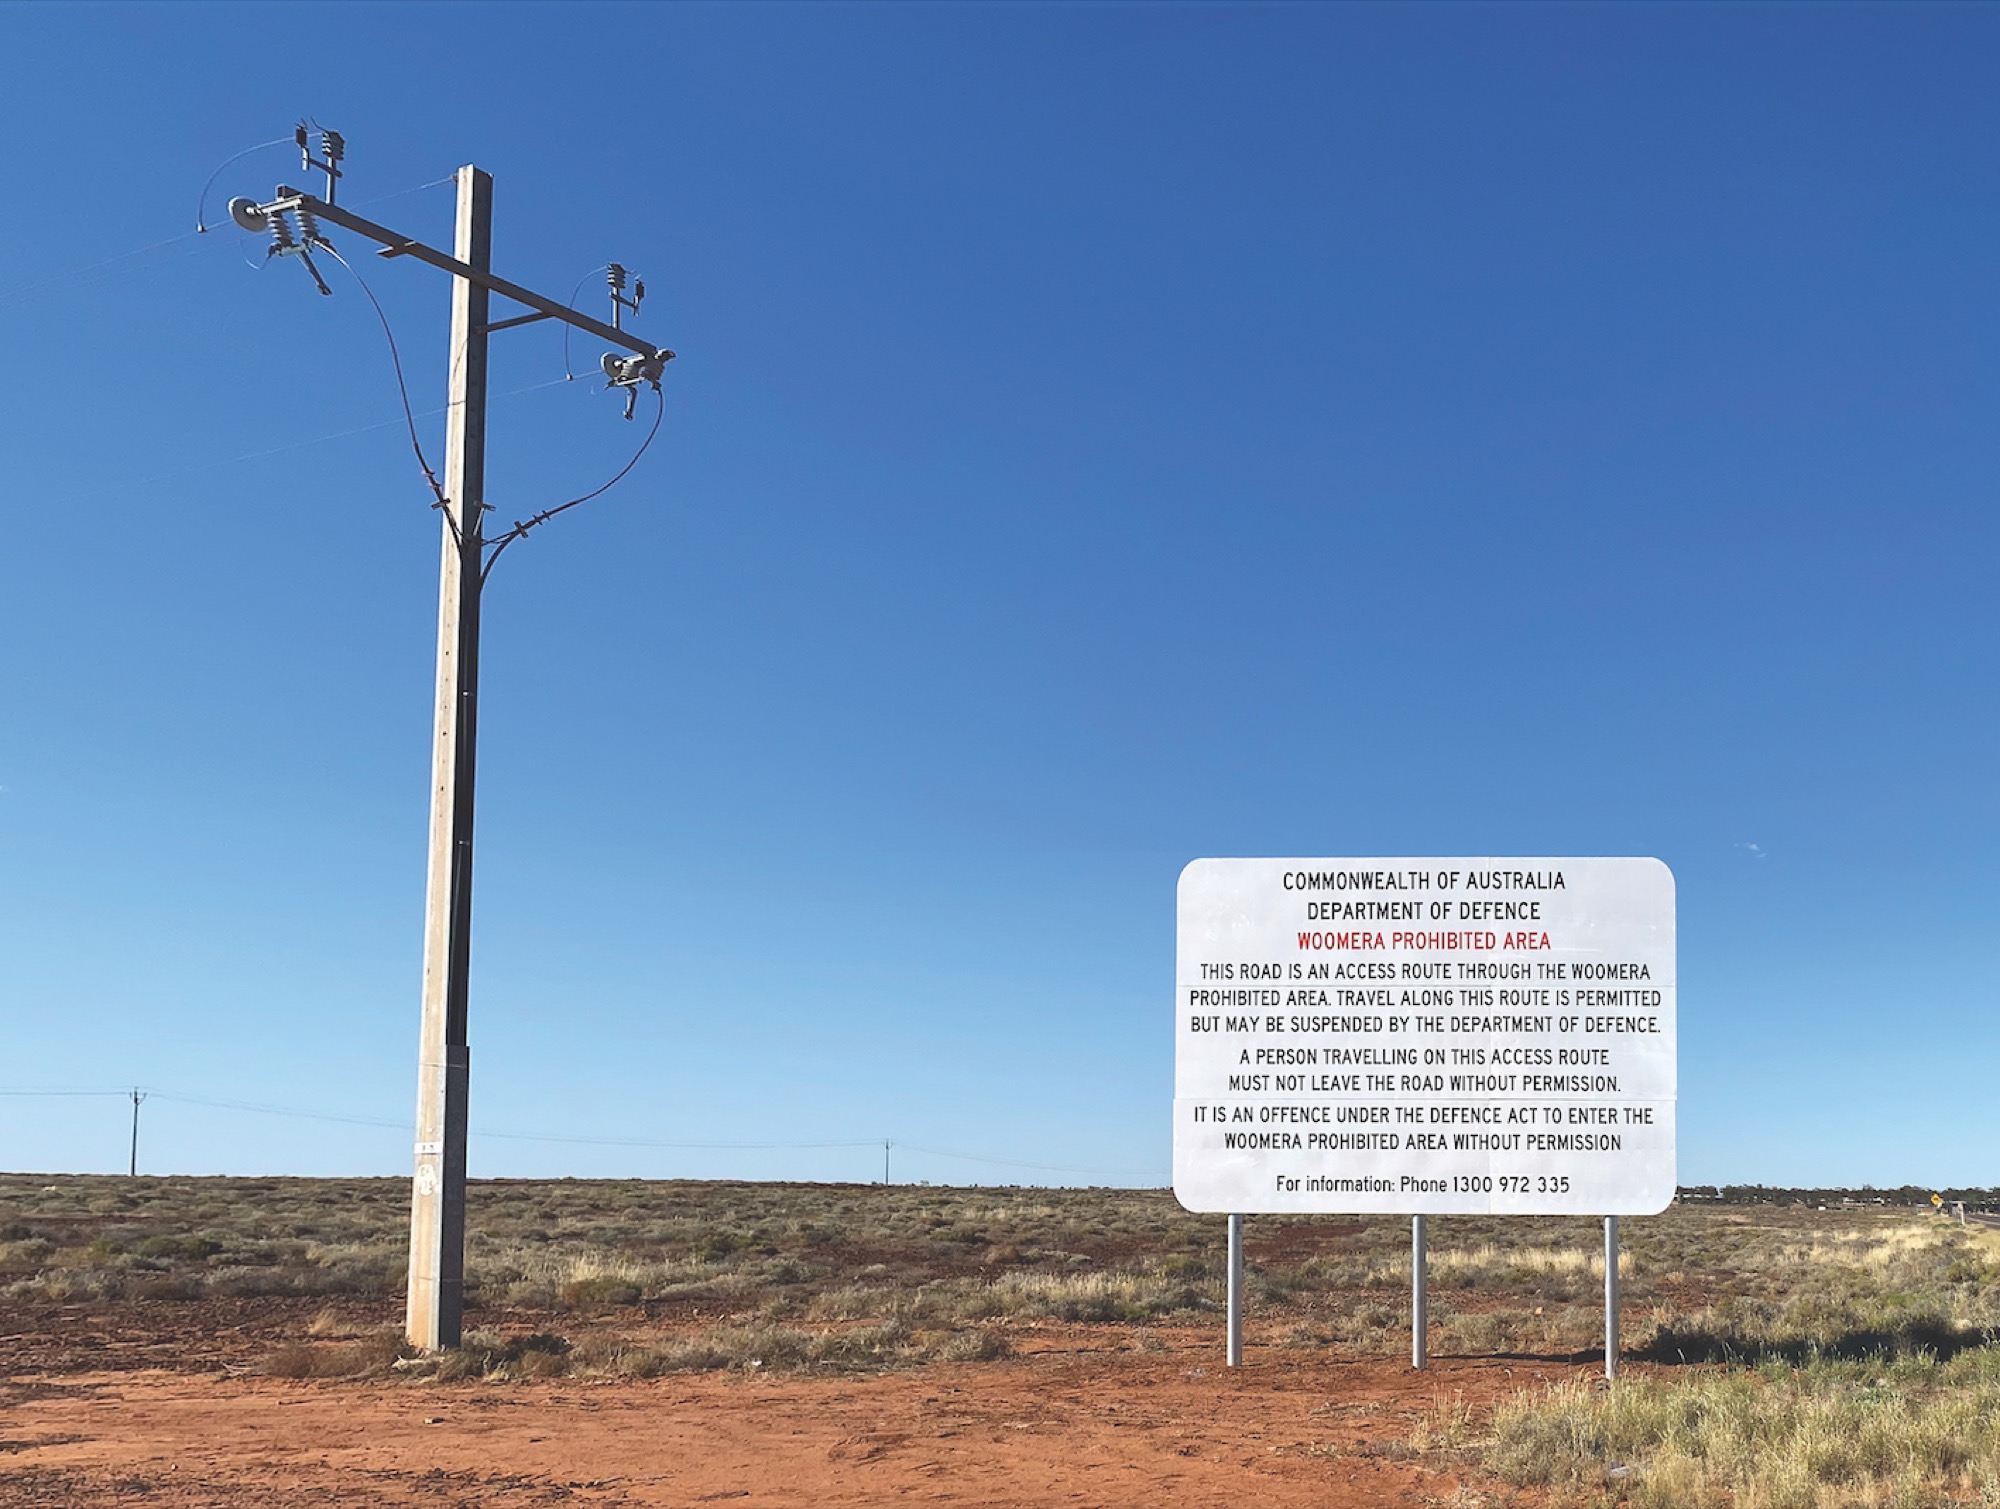 Yhonnie Scarce, <em>Prohibited Zone, Woomera</em>, 2021, research photograph. Courtesy the artist and THIS IS NO FANTASY, Melbourne.